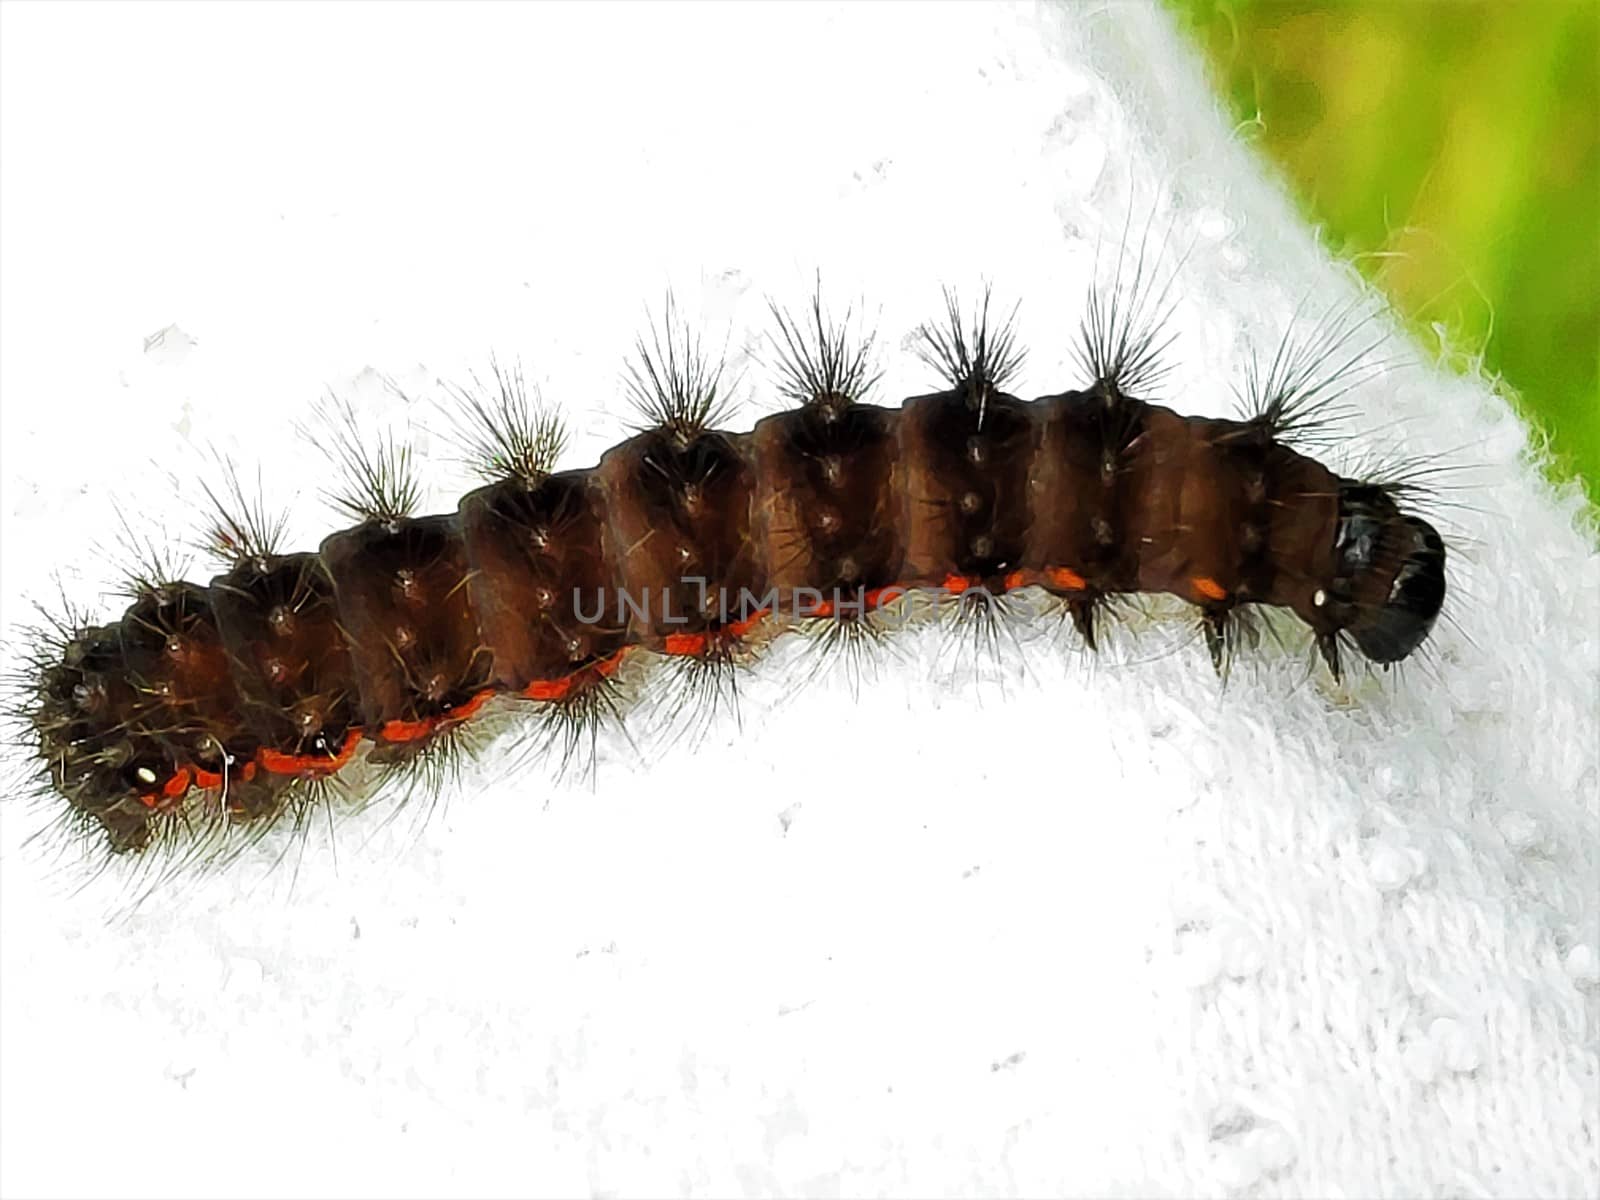 Black-brownish and orange catterpillar spotted on some wool material